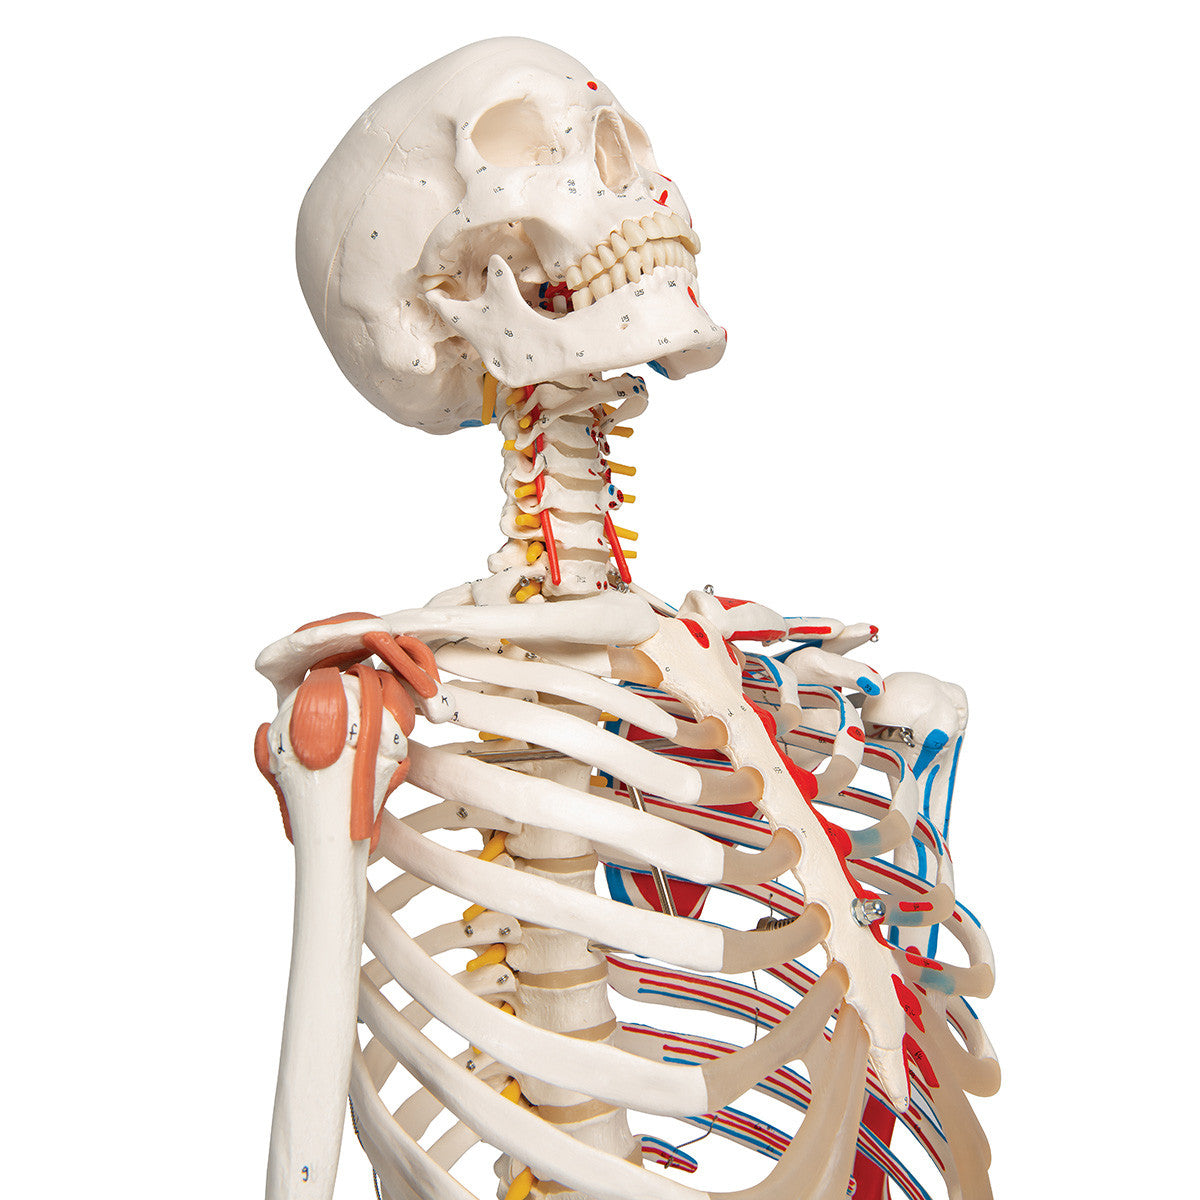 Super Skeleton with Muscle and Ligaments